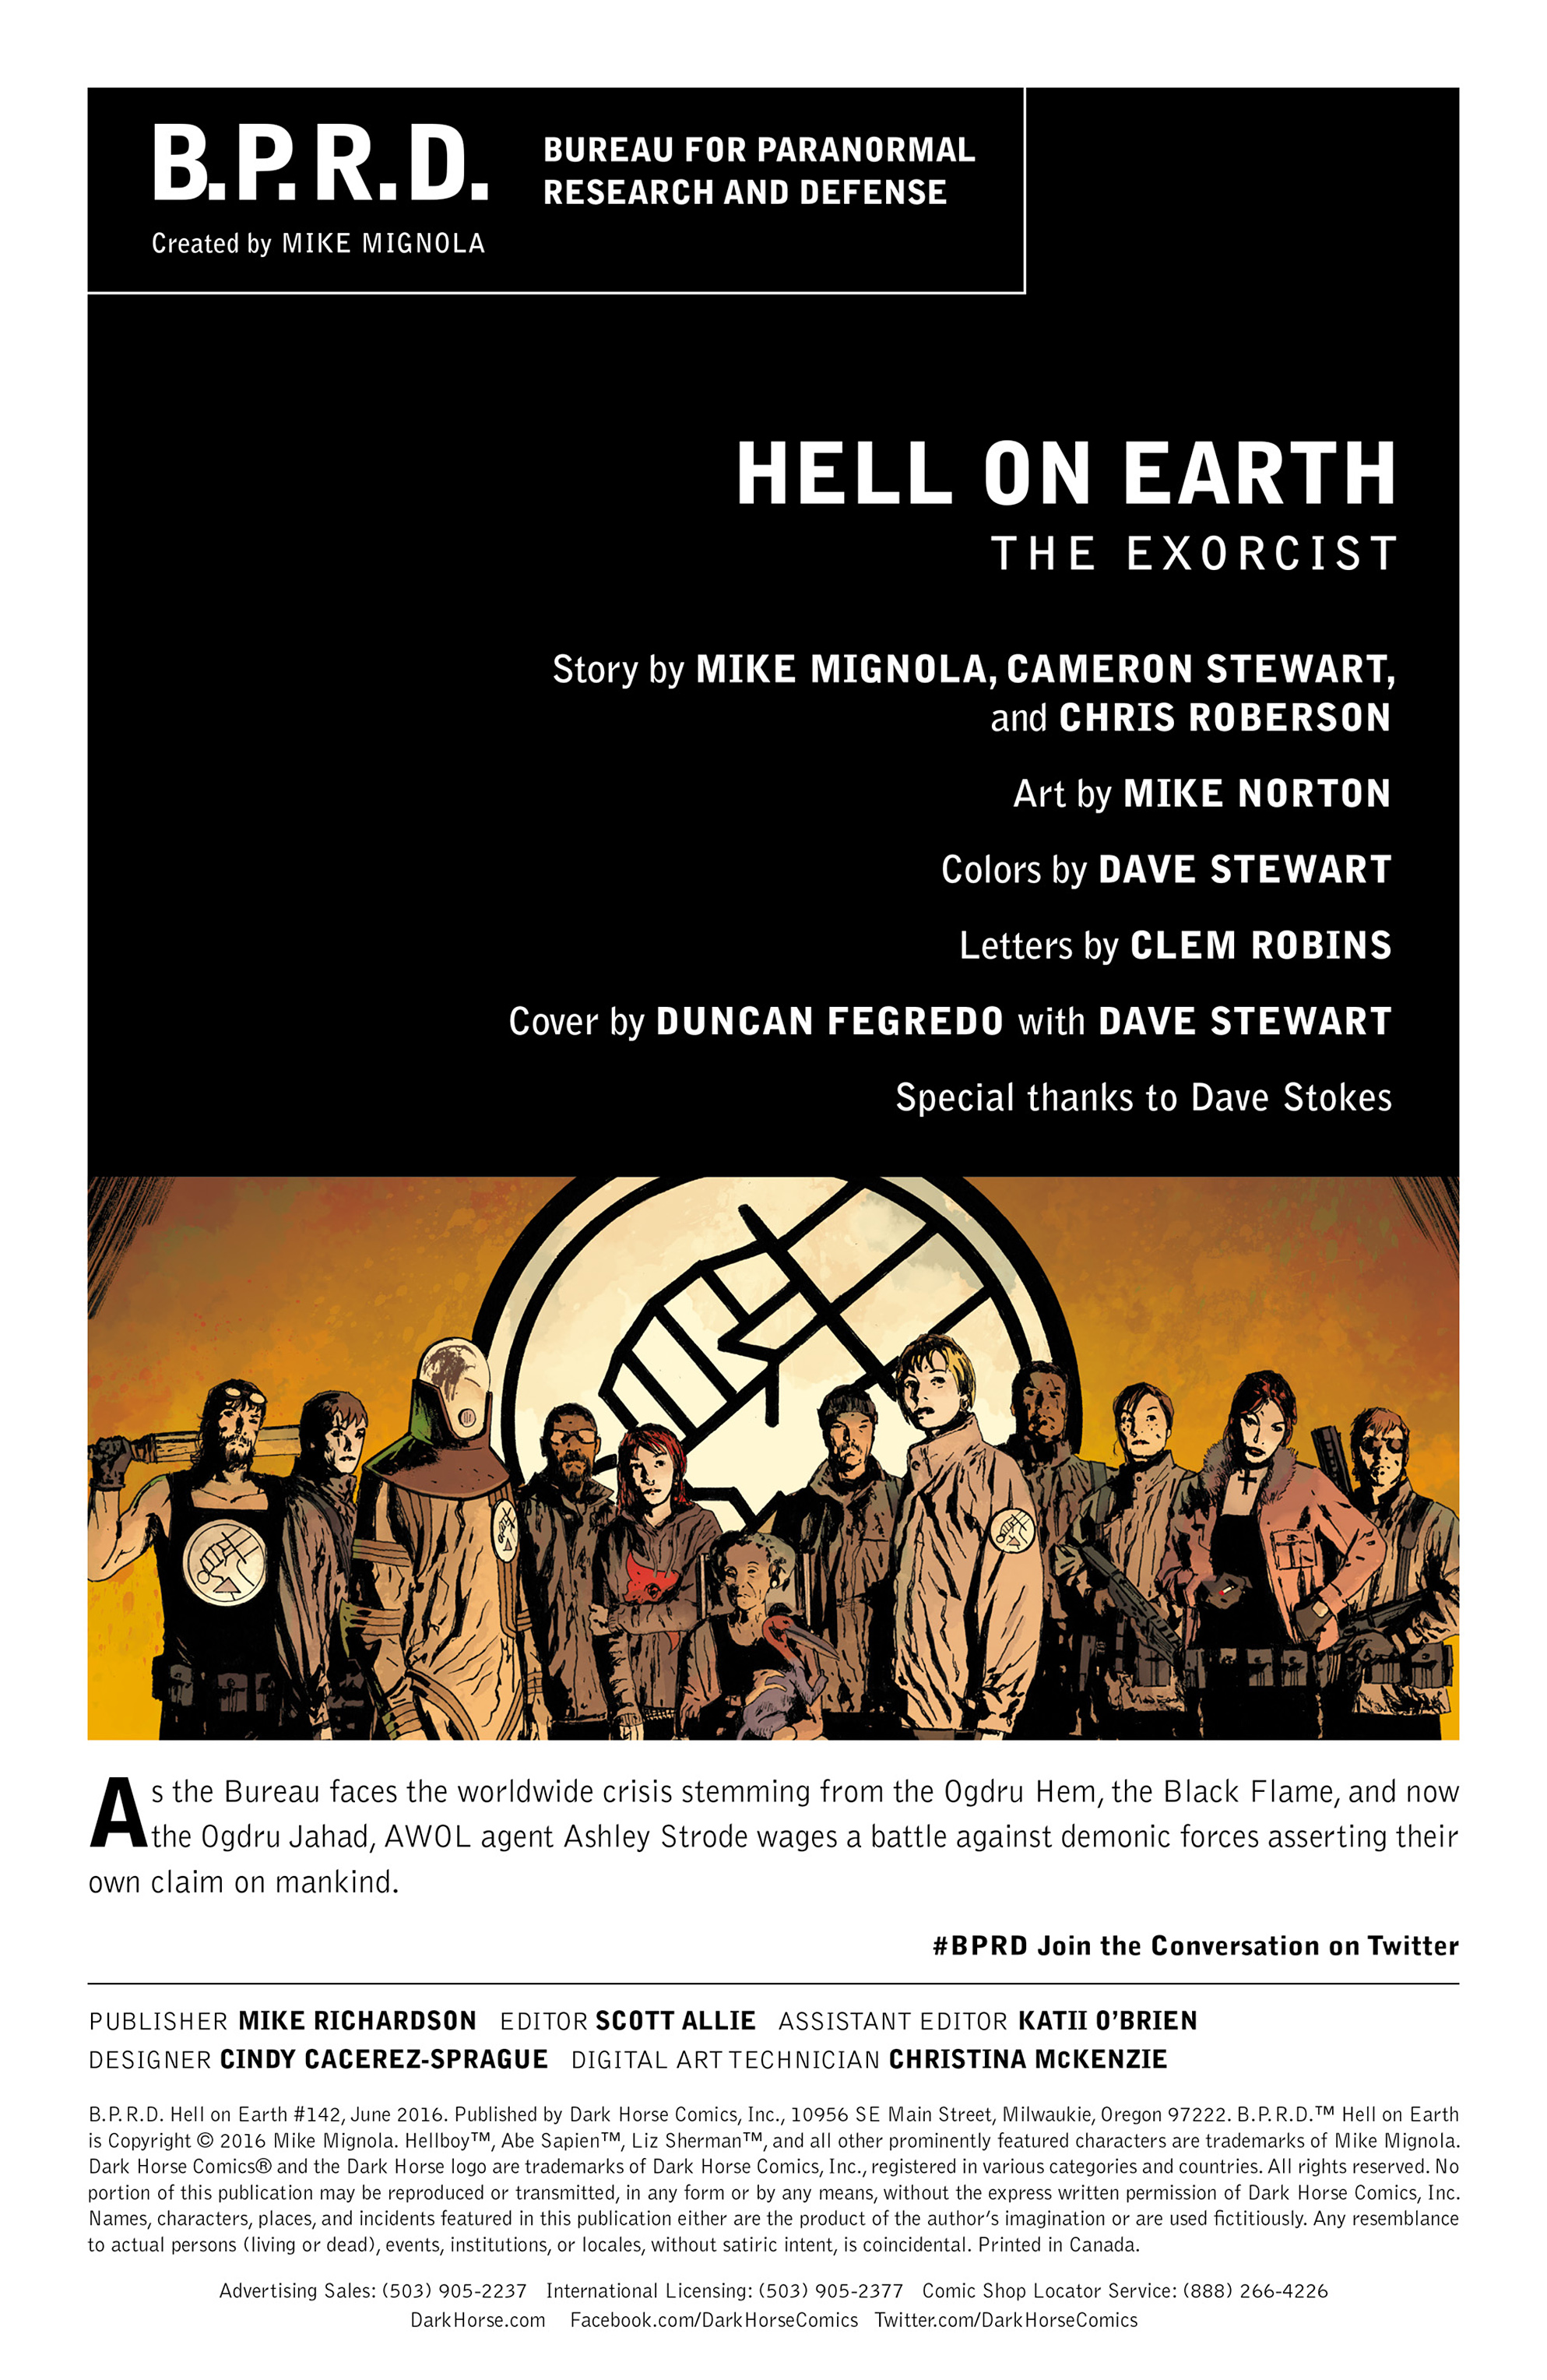 Read online B.P.R.D. Hell on Earth comic -  Issue #142 - 2